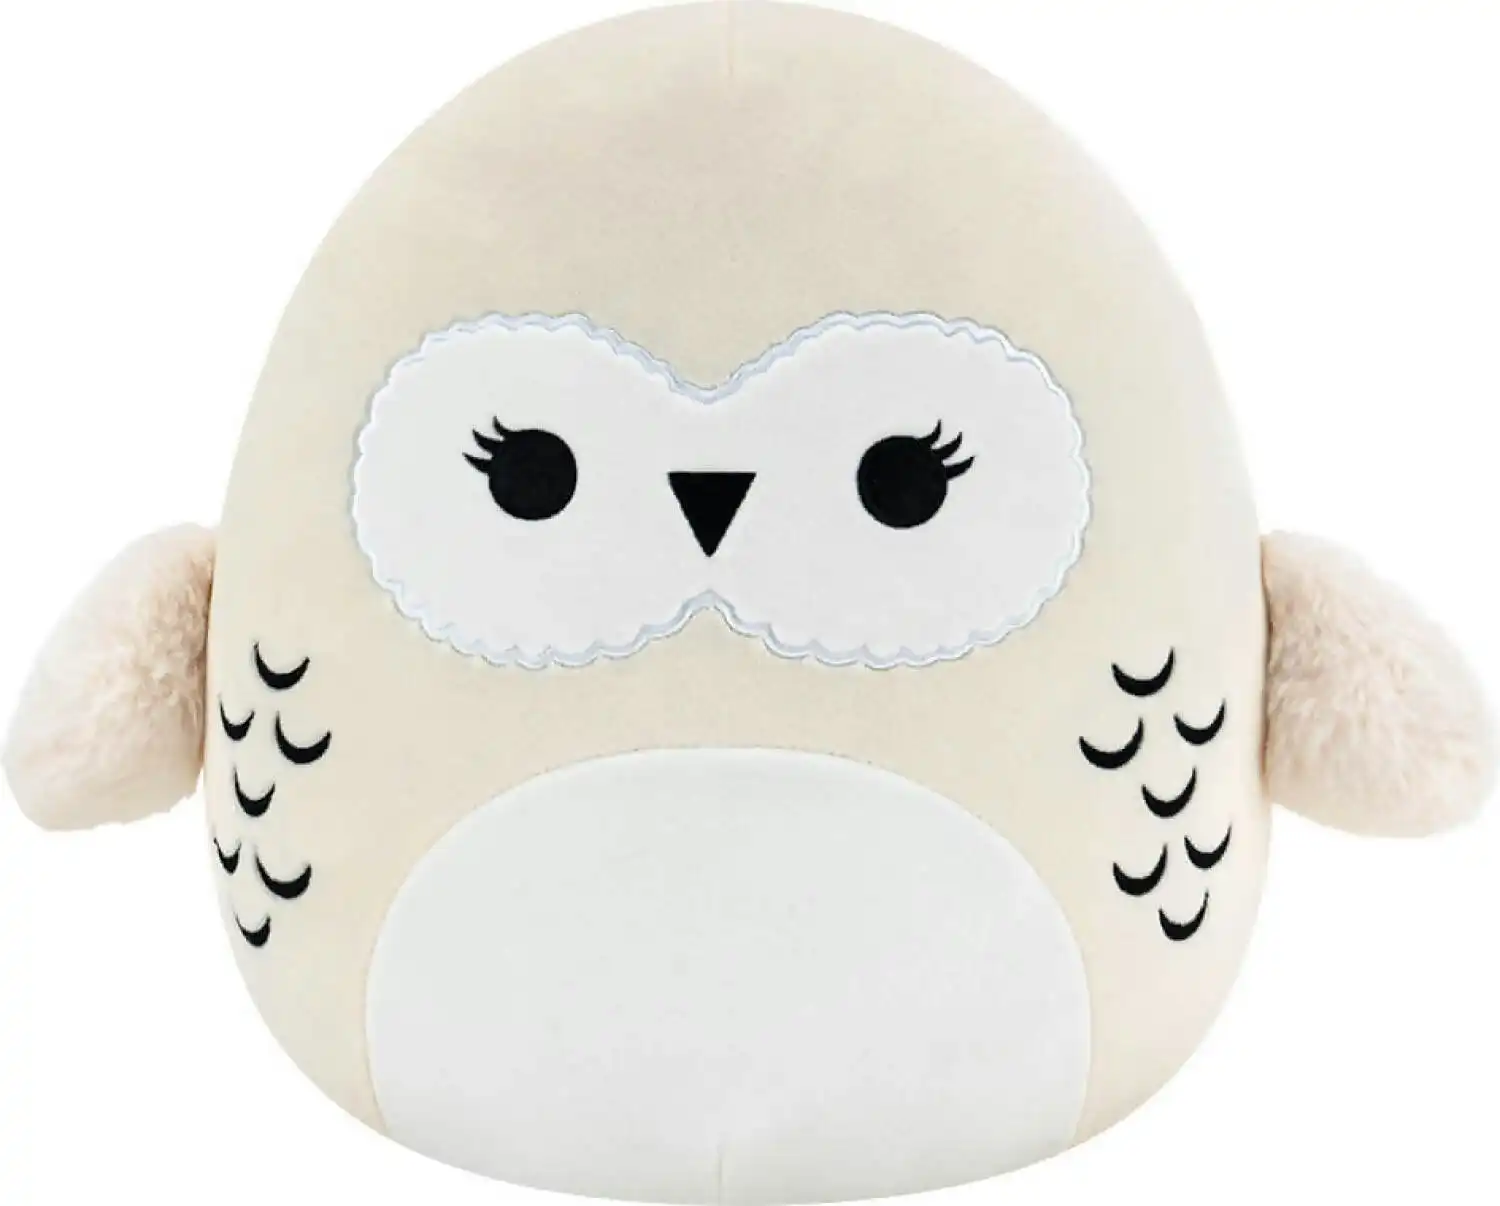 Squishmallows - Hedwig 8-inch Plush - Harry Potter